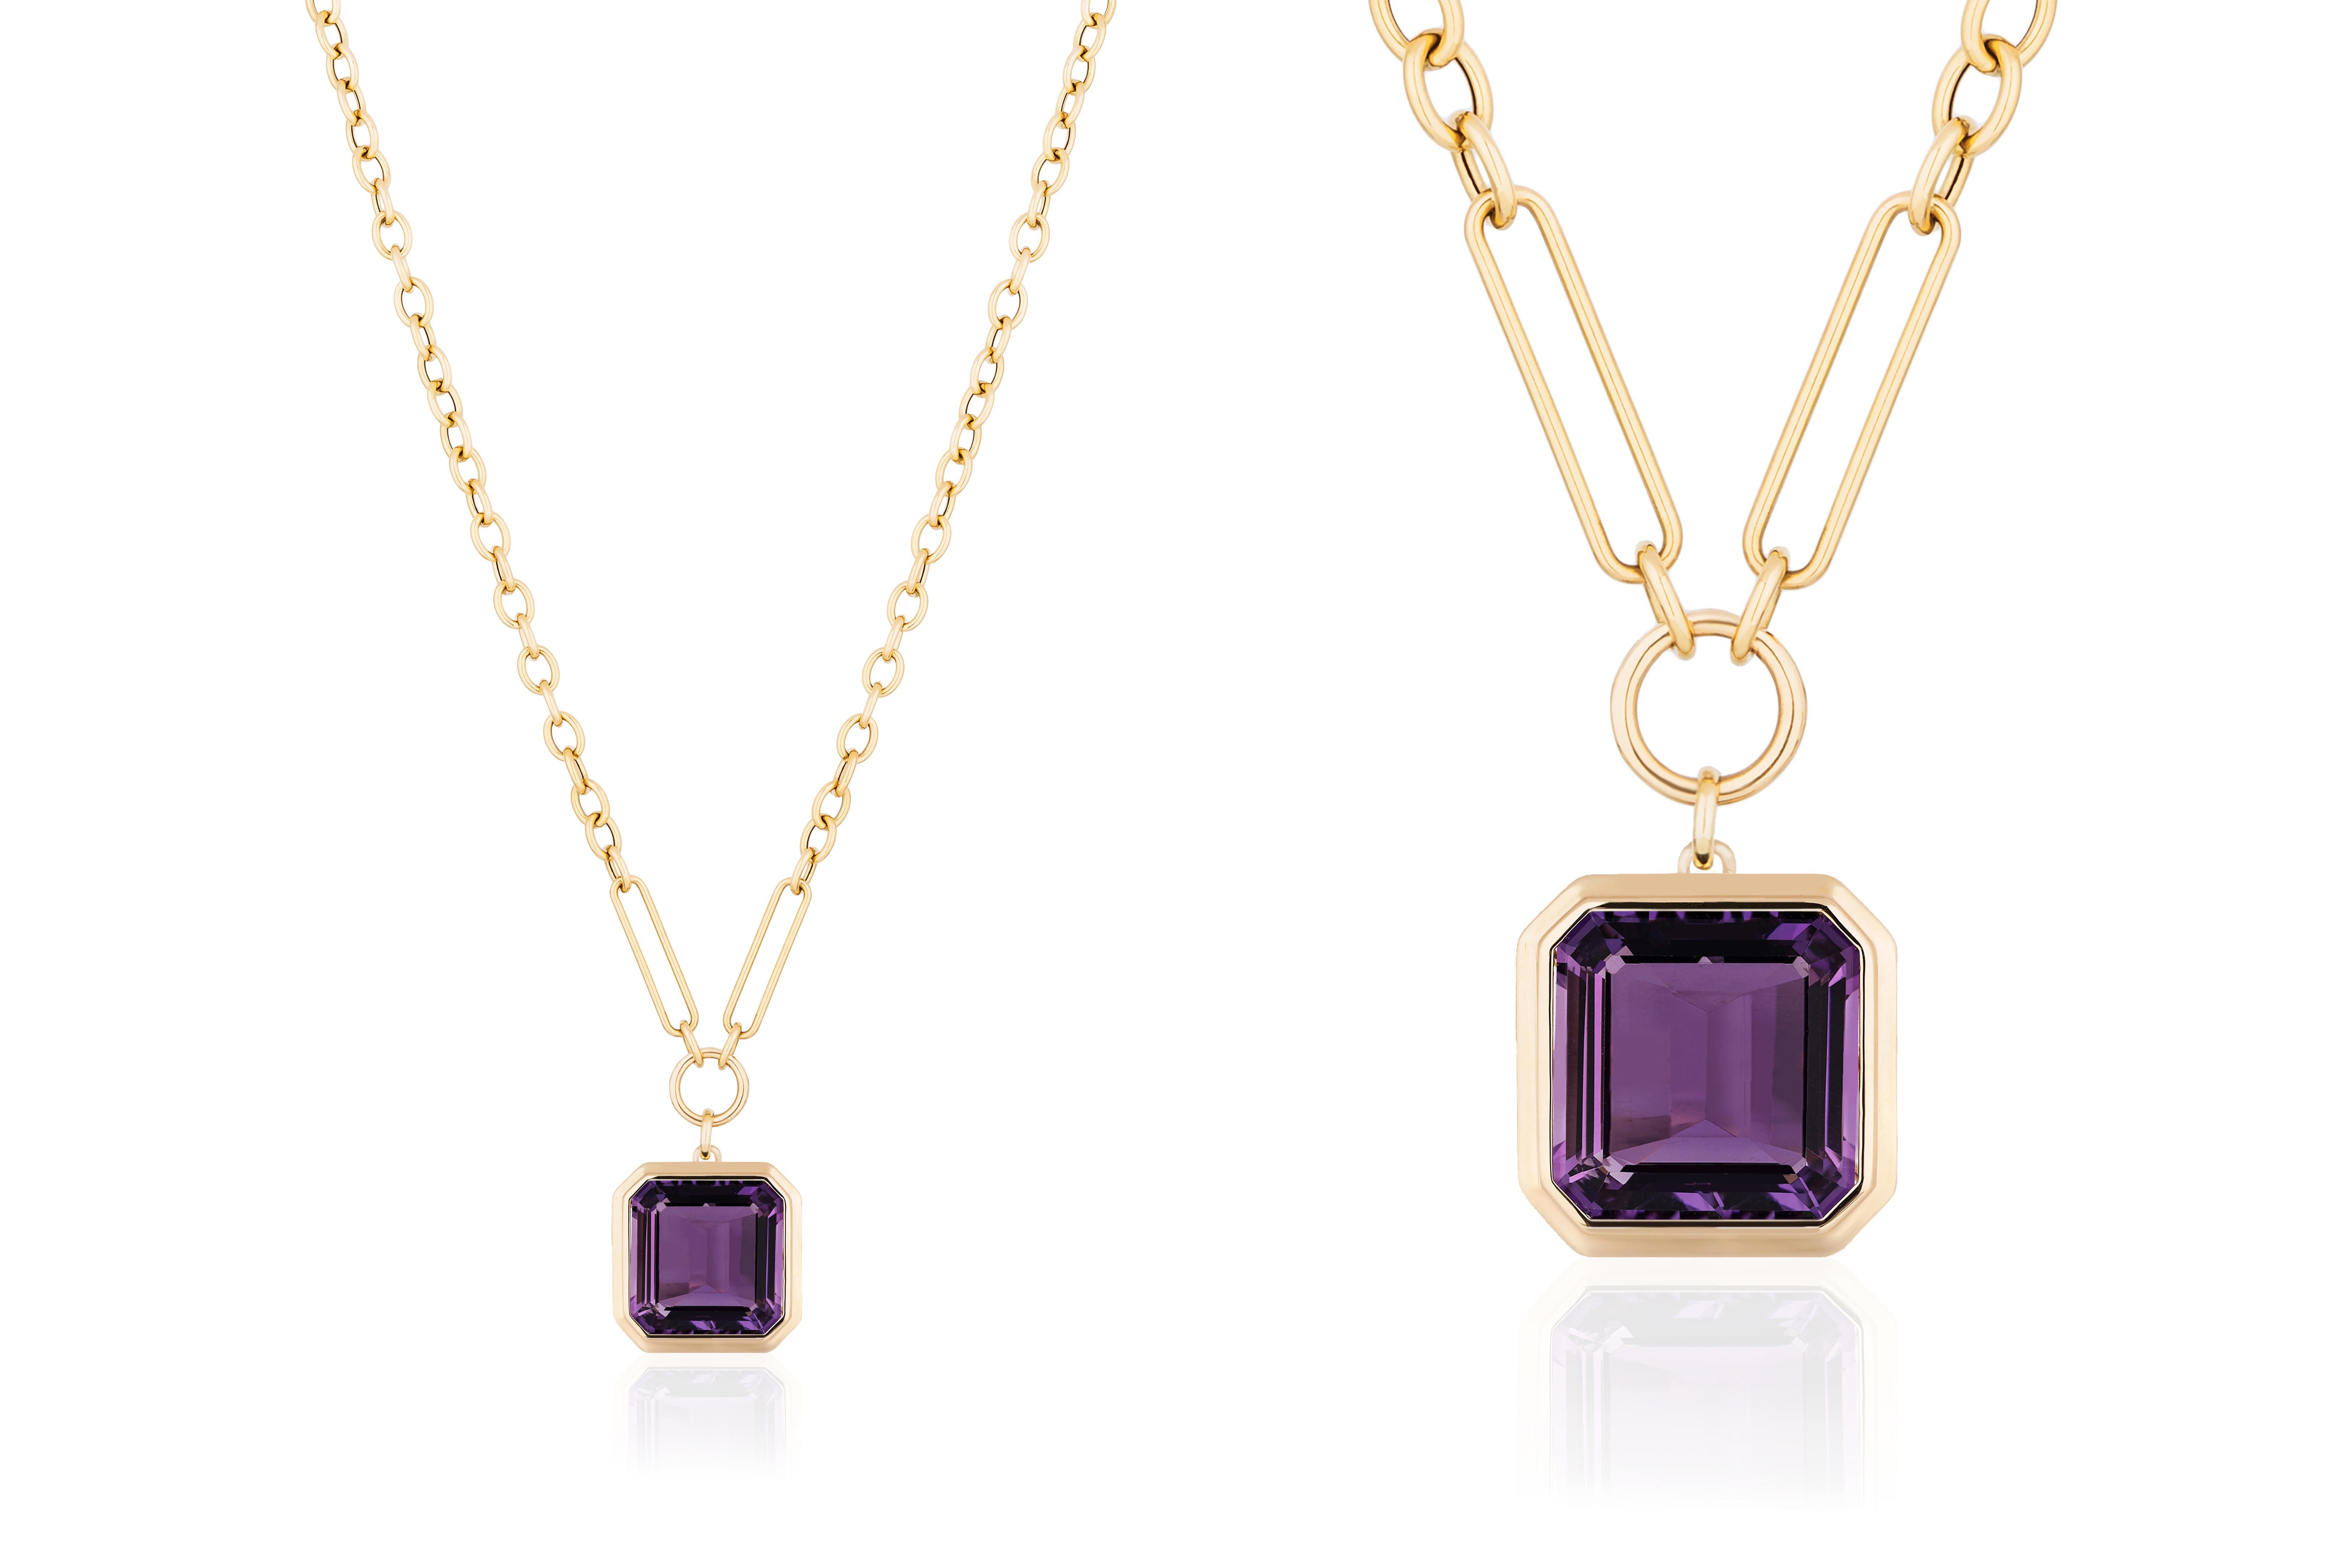 Emerald Cut Amethyst Pendant in 18K Yellow Gold, from 'Manhattan' Collection.  
Minimalist lines yet bold structures is what our Manhattan Collection is all about. Our pieces represent the famous skyline and cityscapes of New York City which people